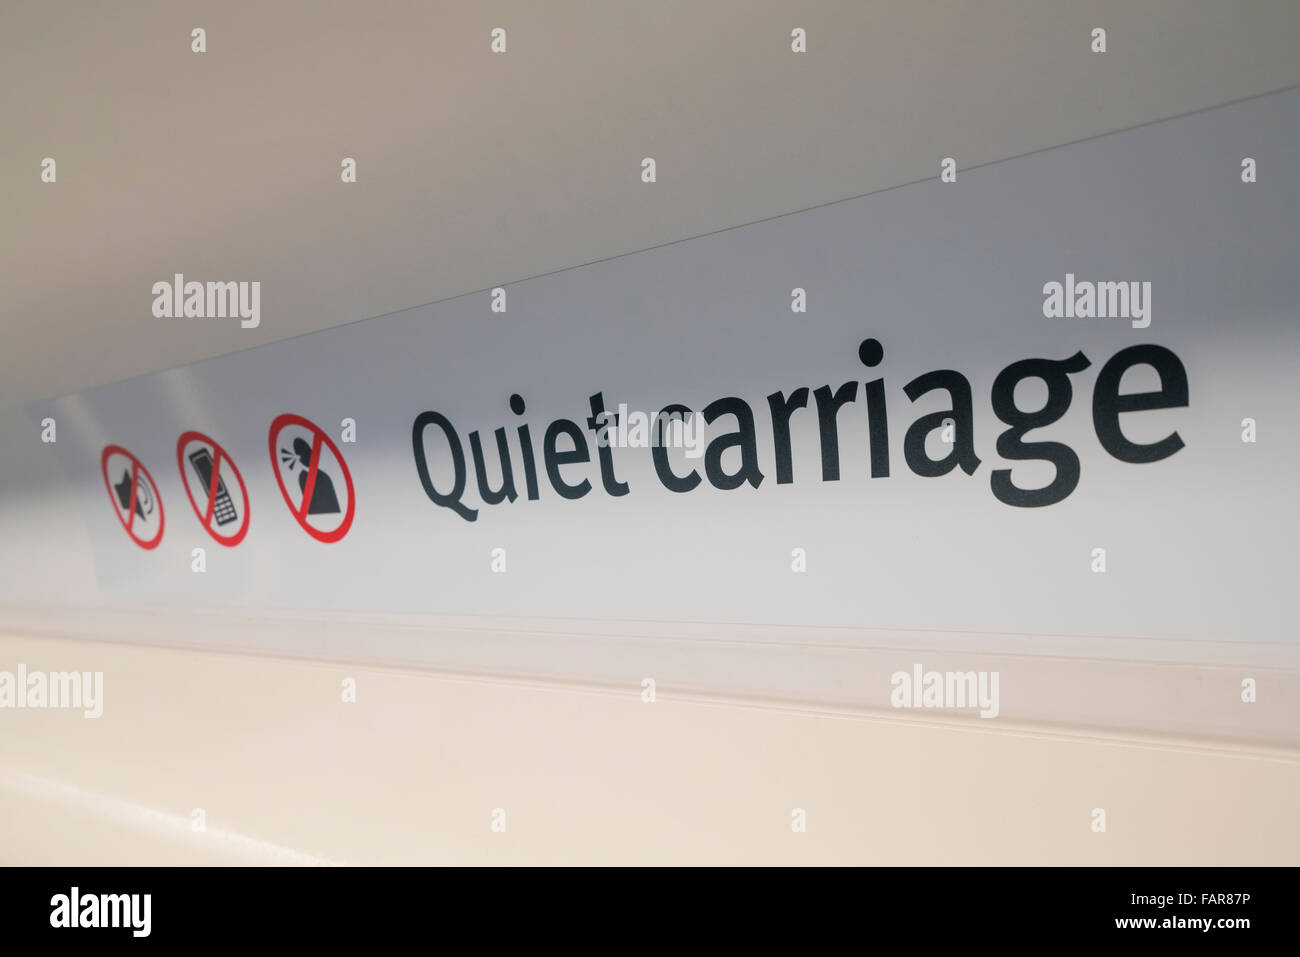 Quiet carriage sign on a train Stock Photo